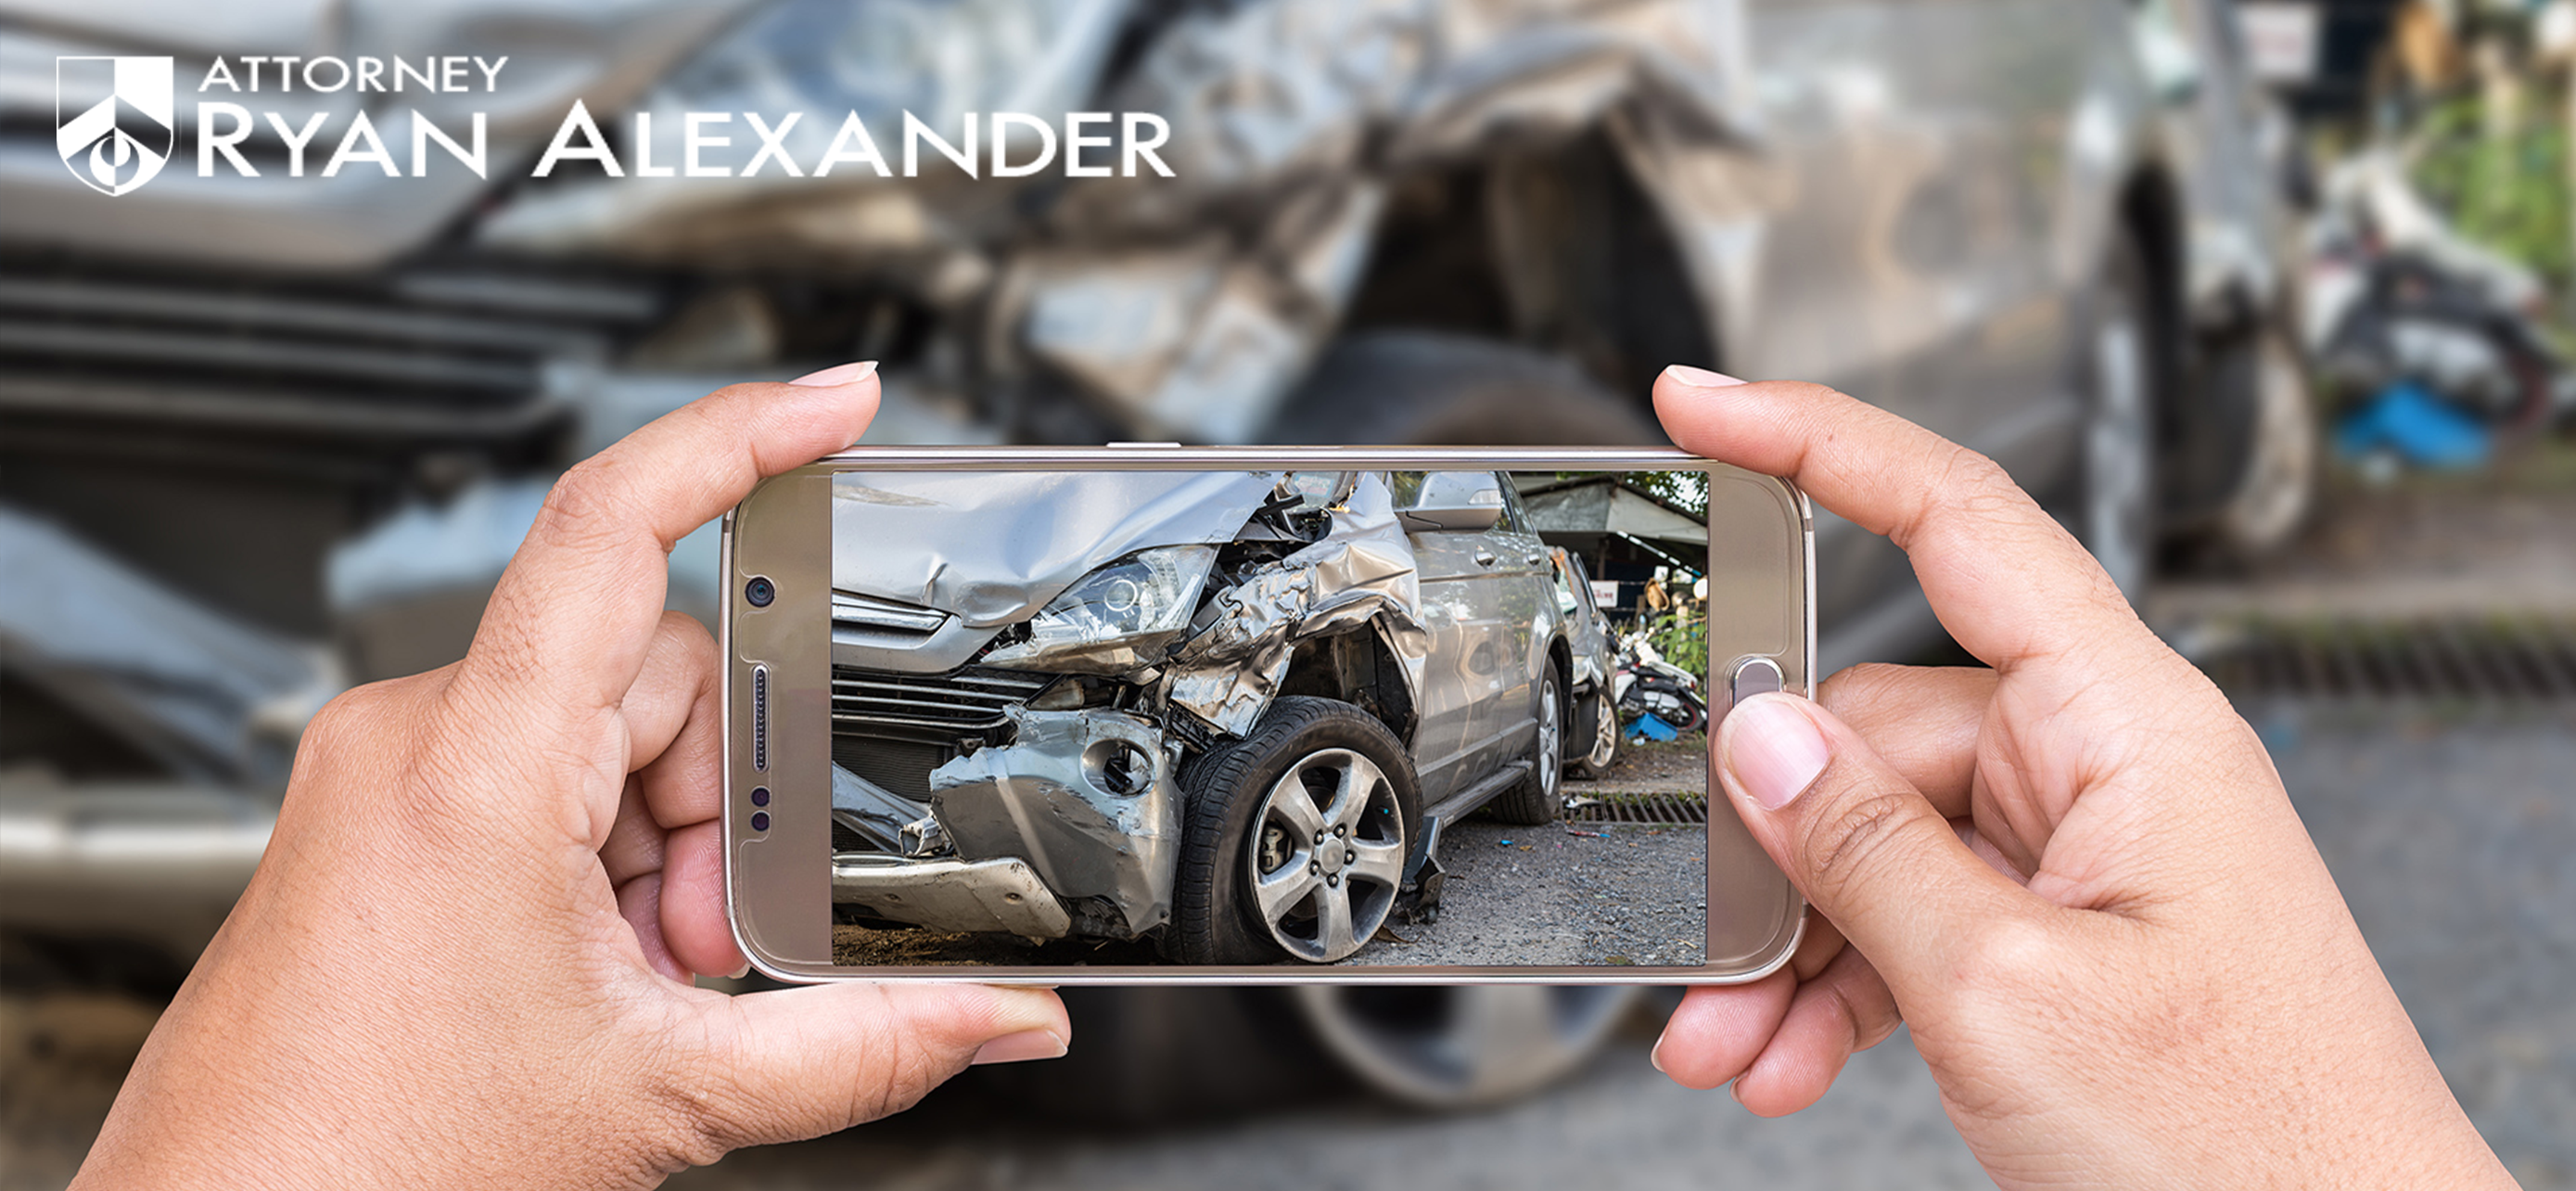 #1 abogado accidente vegas - _Ryan Alexander - what is a hit and run accident in Las Vegas